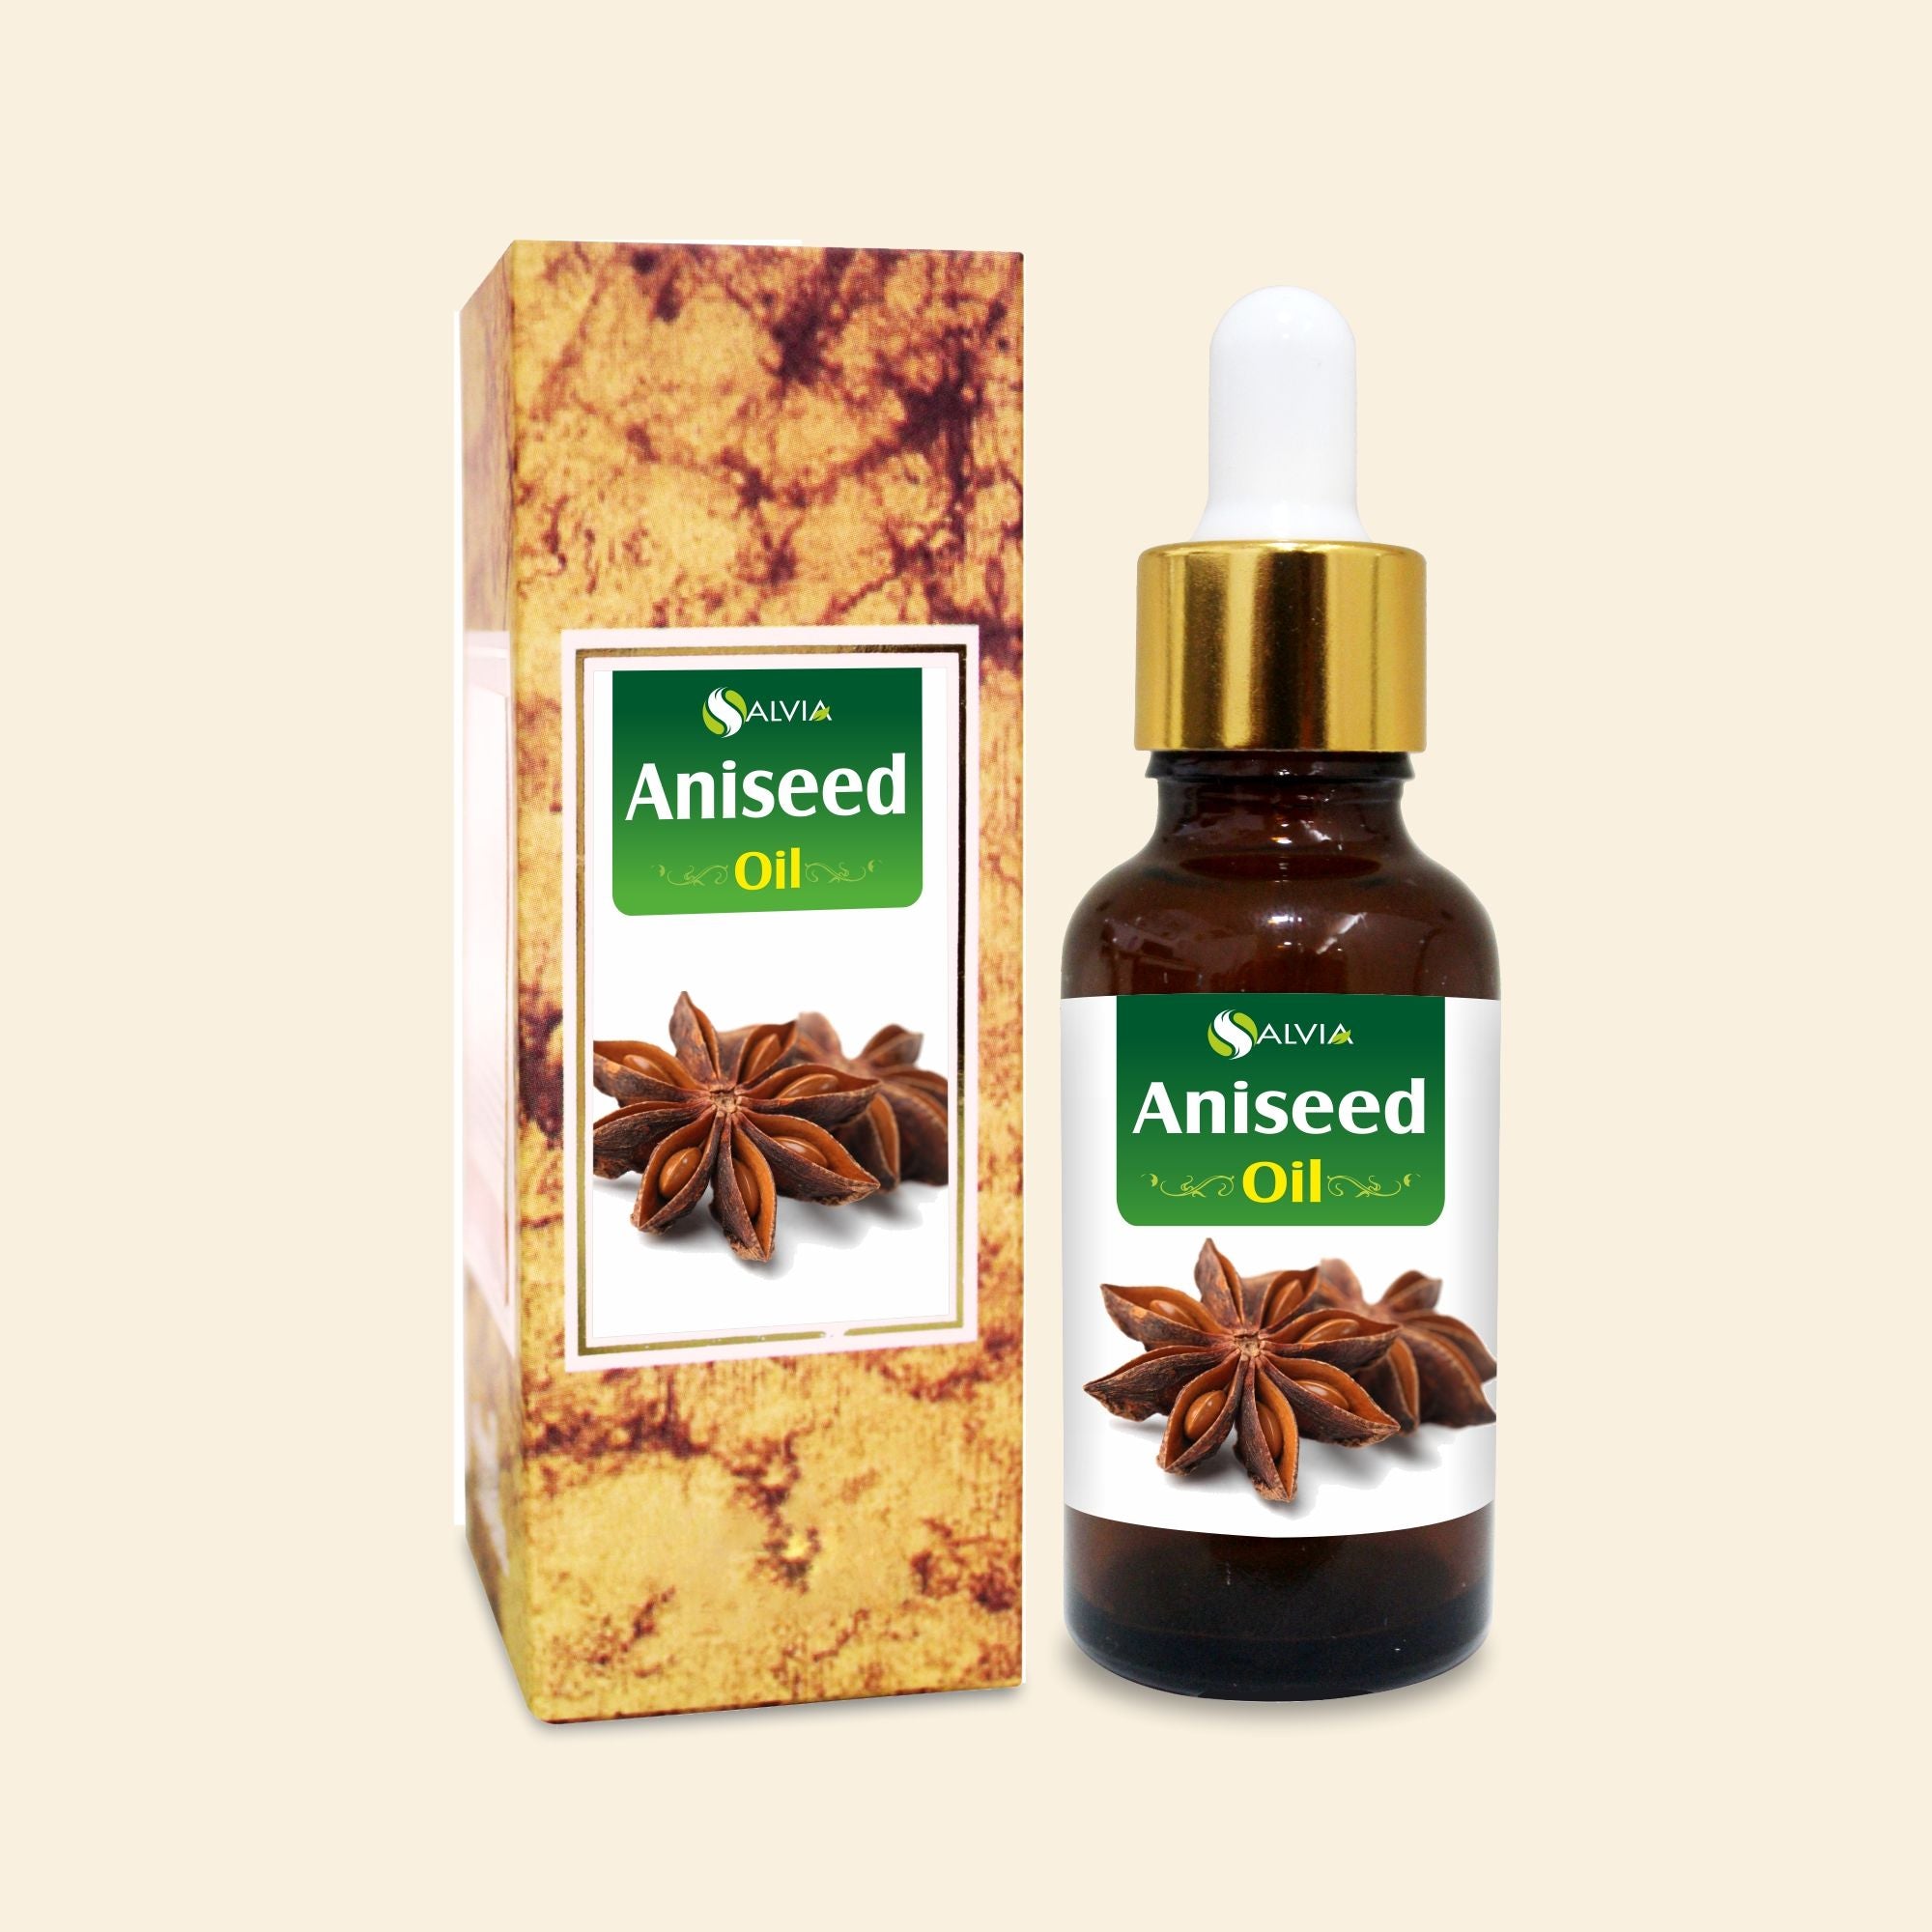 Salvia Natural Essential Oils Aniseed Oil (Pimpinella Anisum) Natural Pure Essential Oil